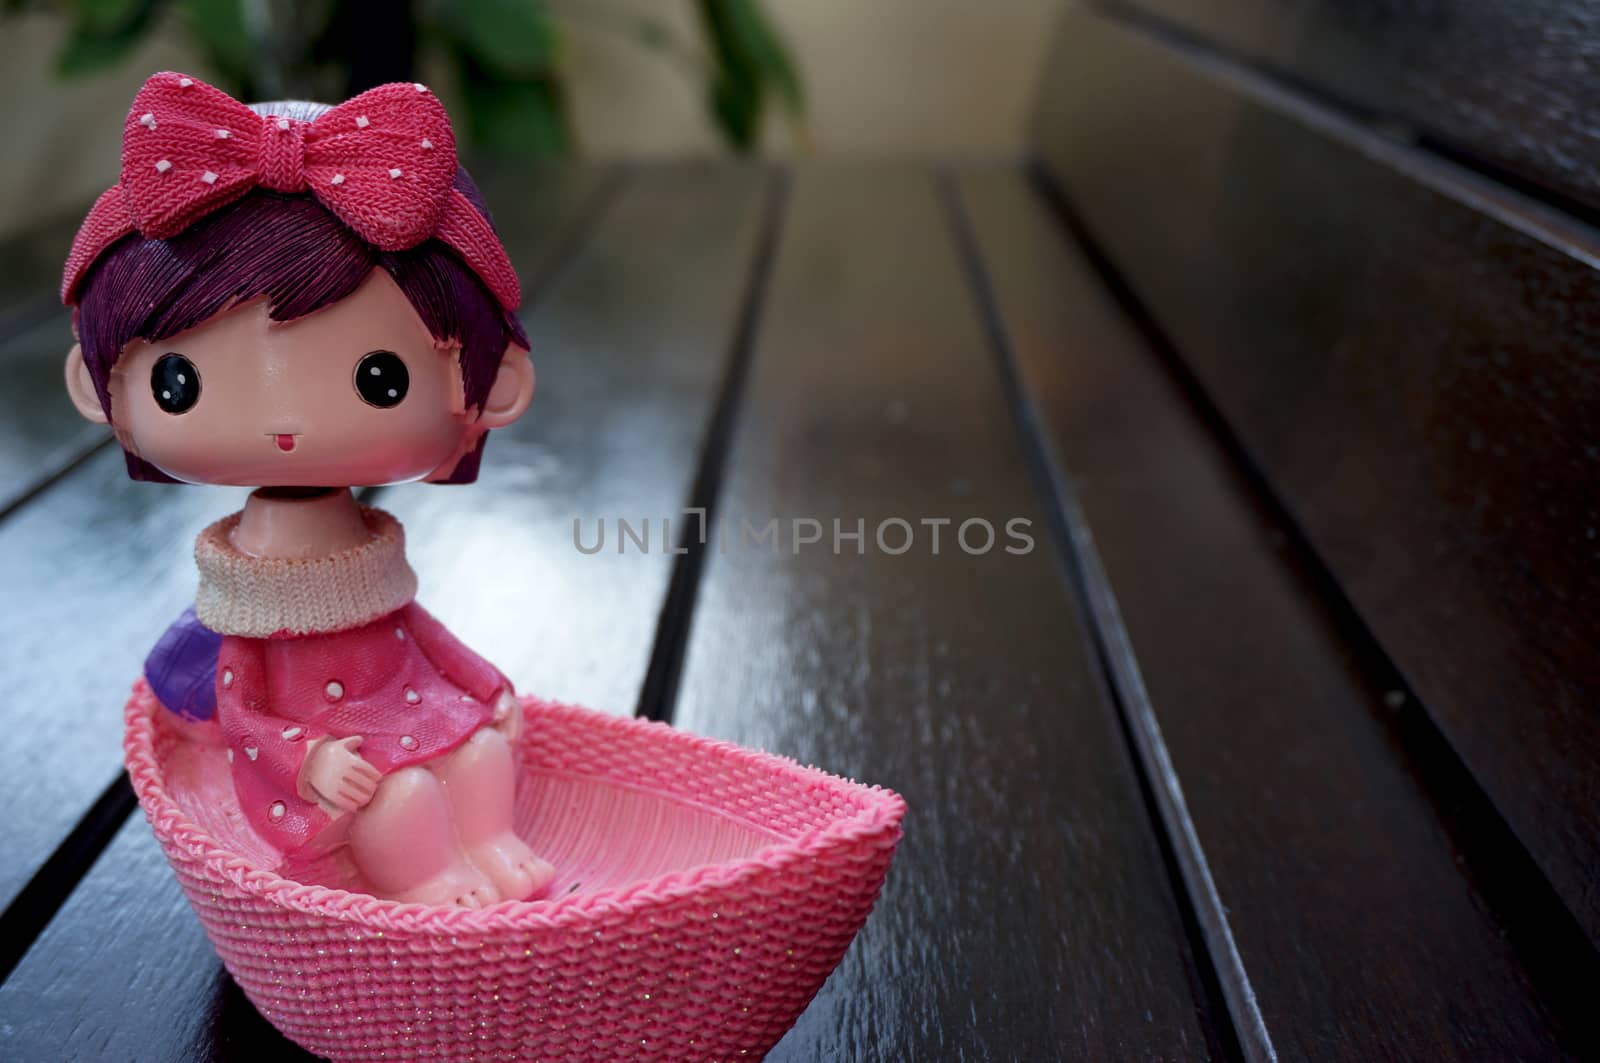 Doll on wooden chair by ninun